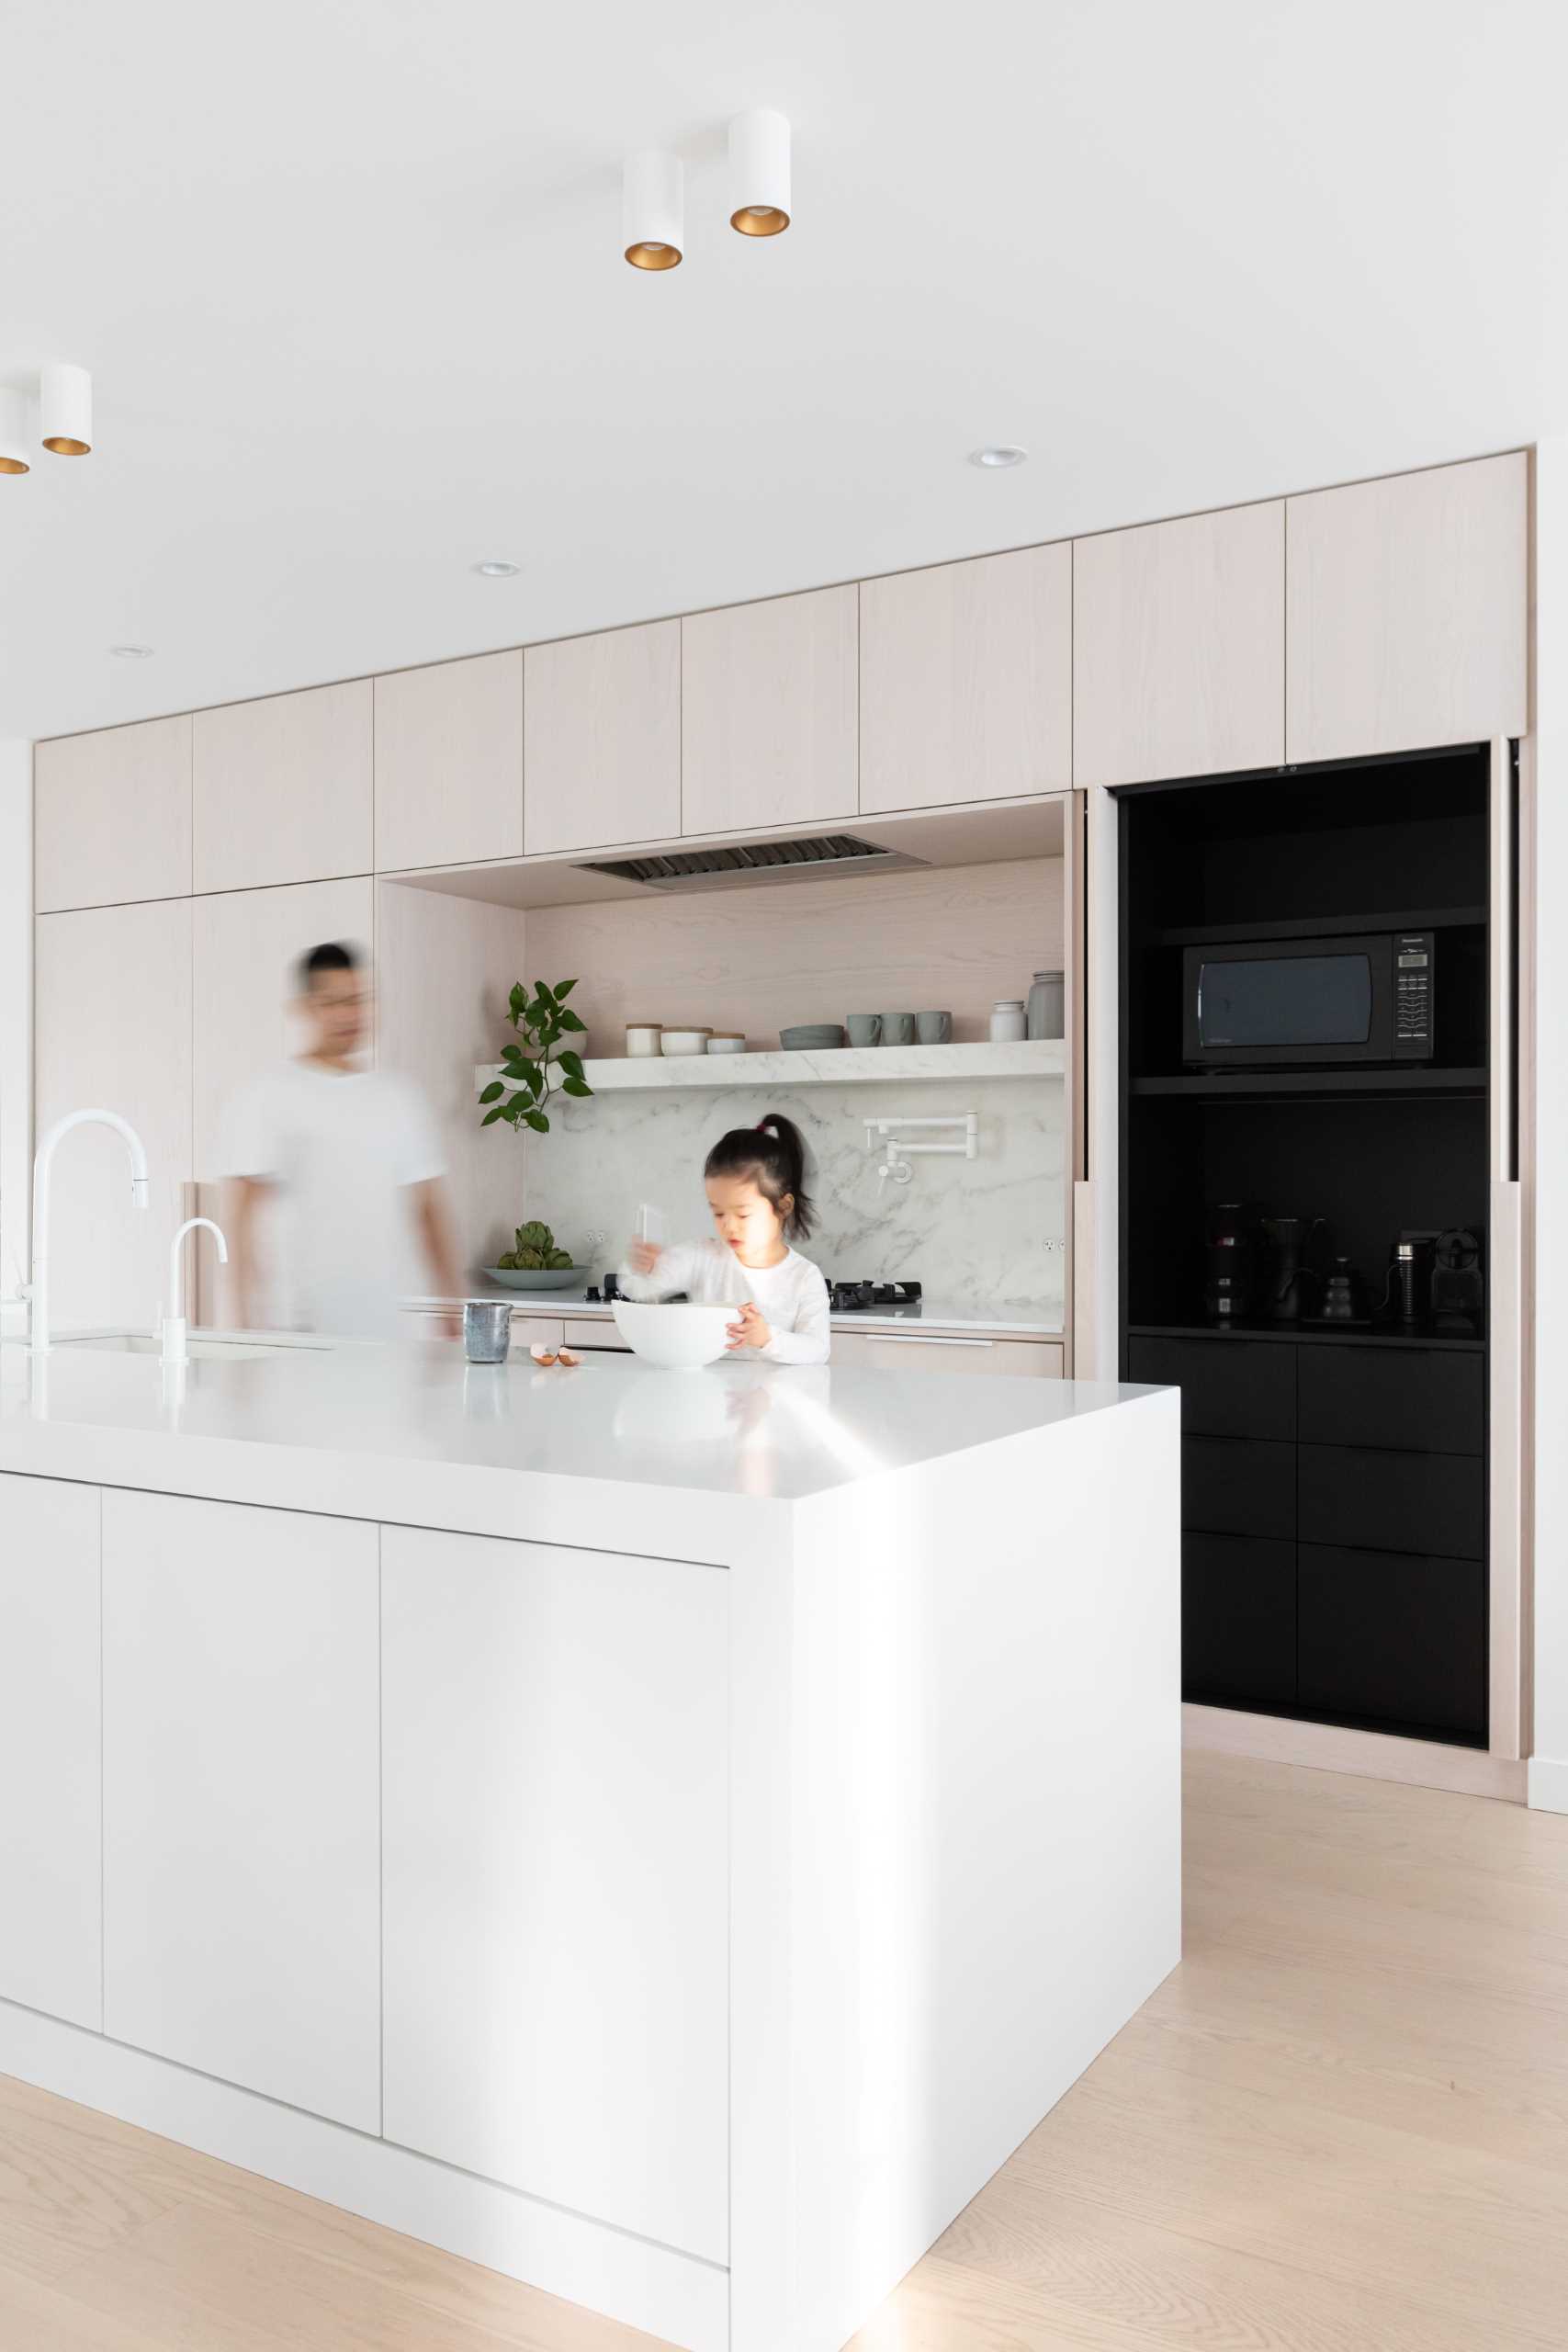 In this modern kitchen, there's white stained oak, cool white marble, and black accents.